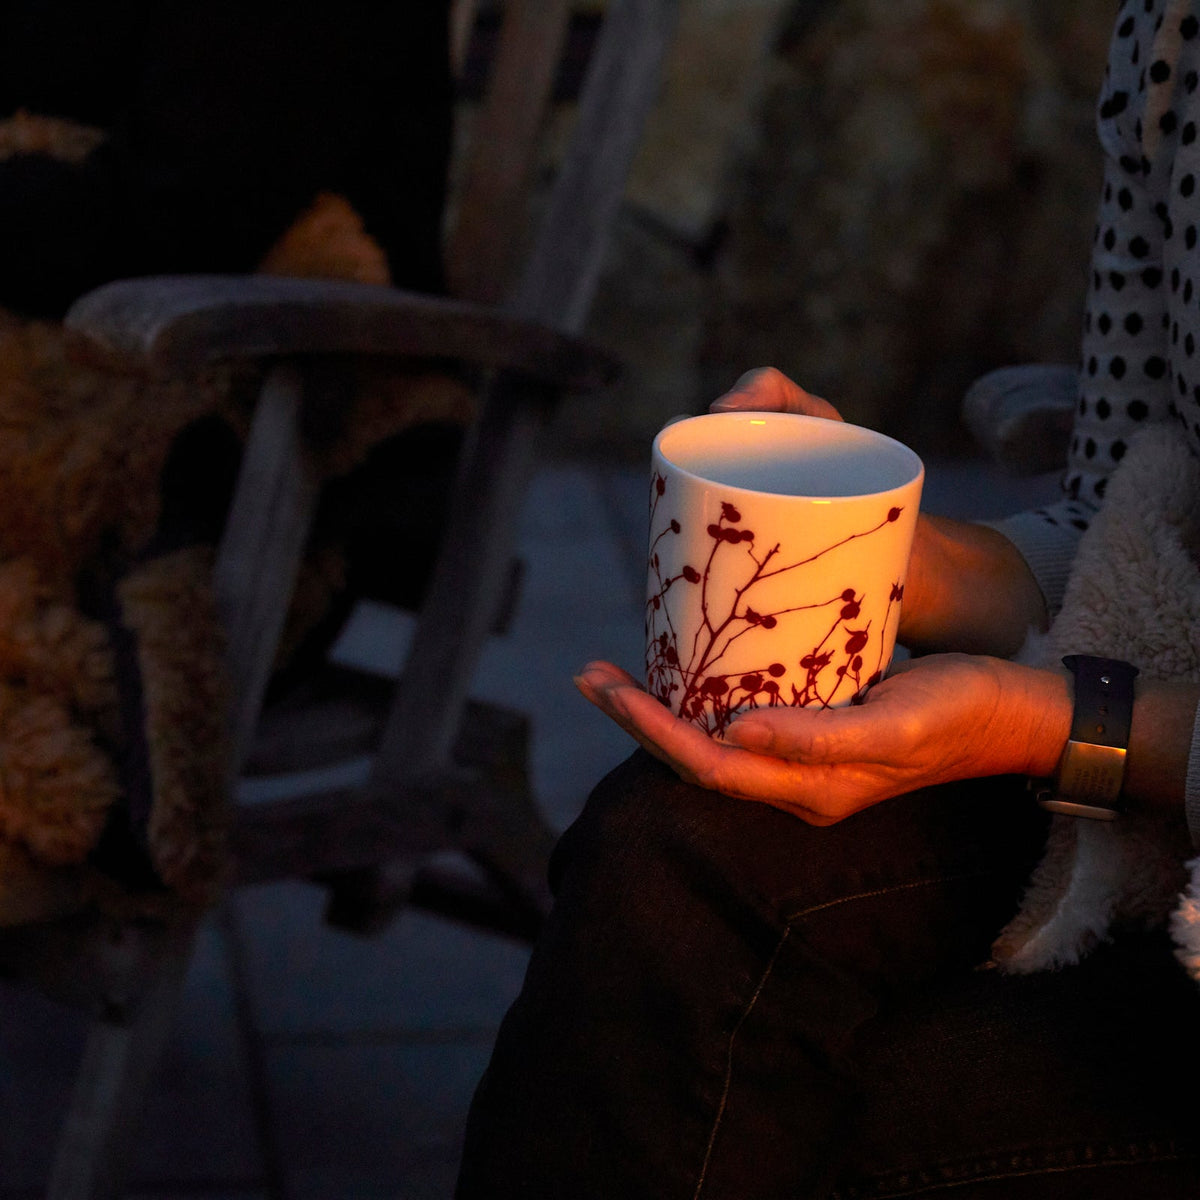 A person holding a generously sized Caskata Artisanal Home Winterberries Mug, sitting in a dimly lit setting.